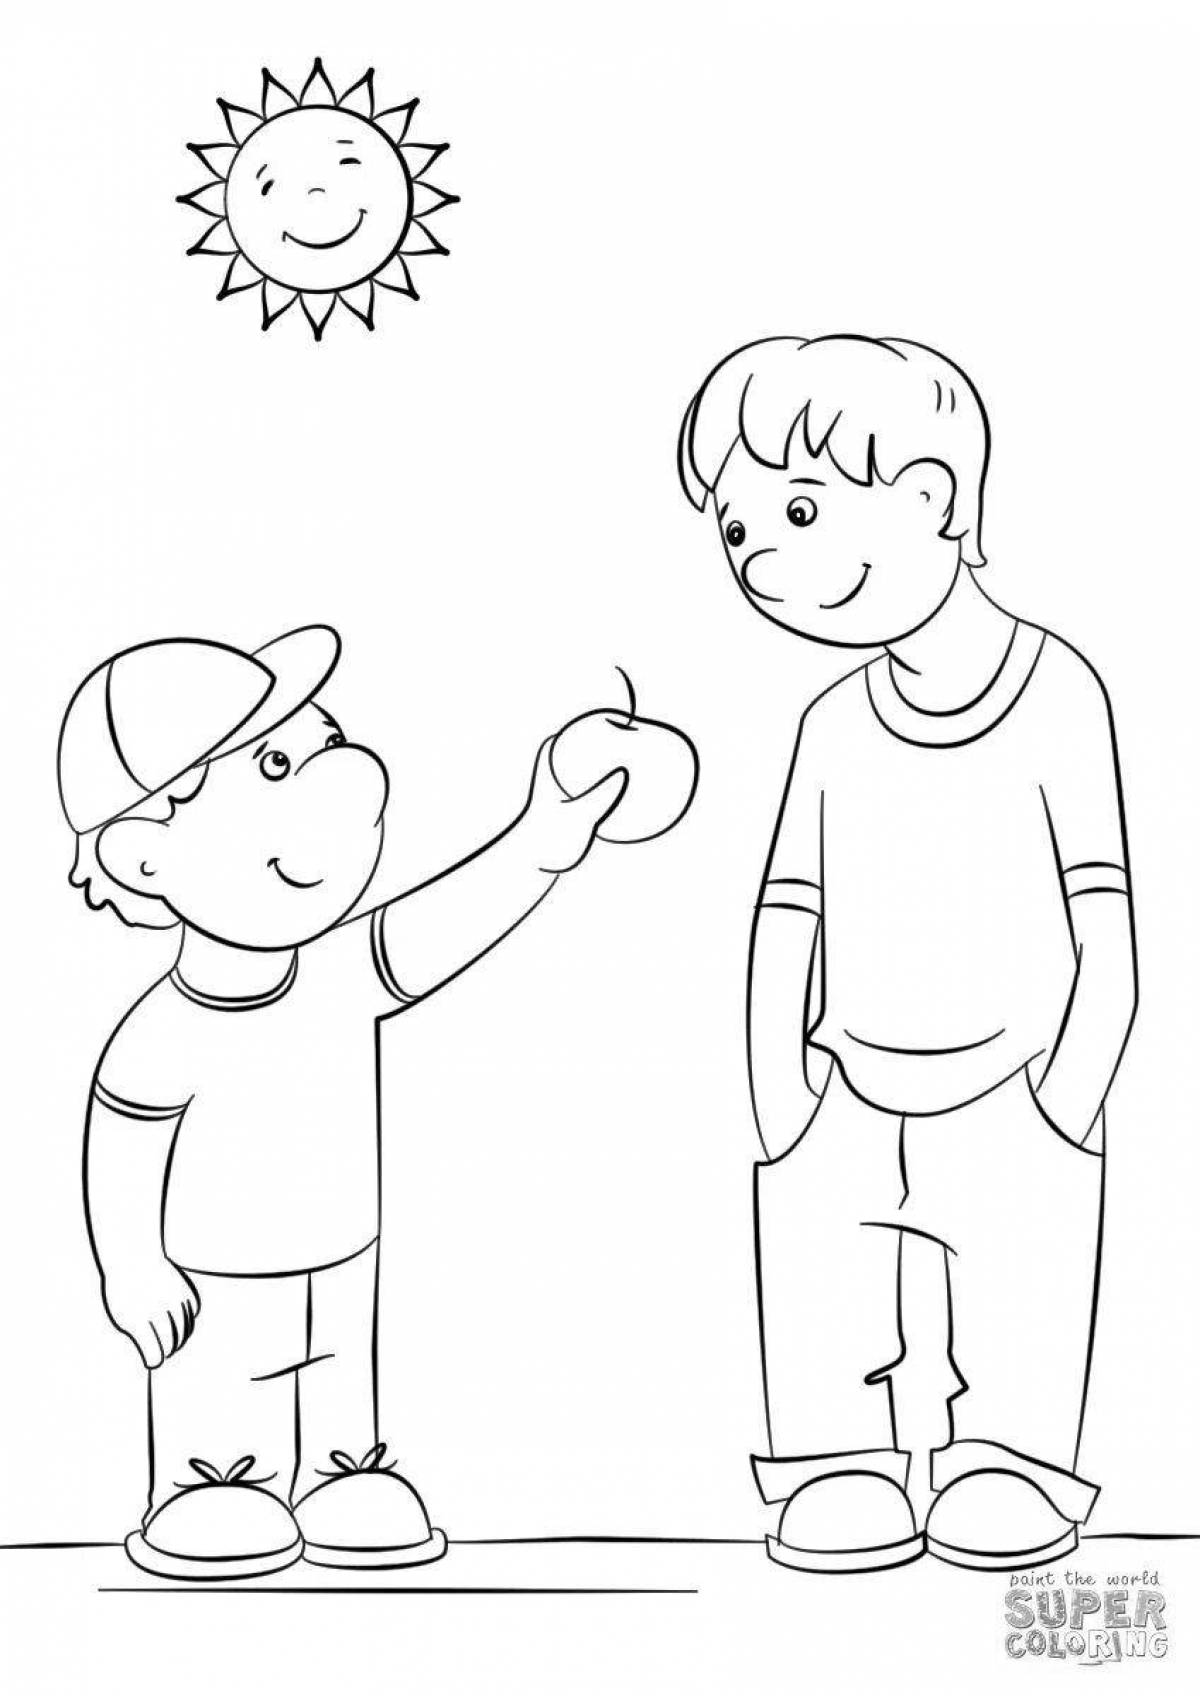 Let's shiny coloring pages